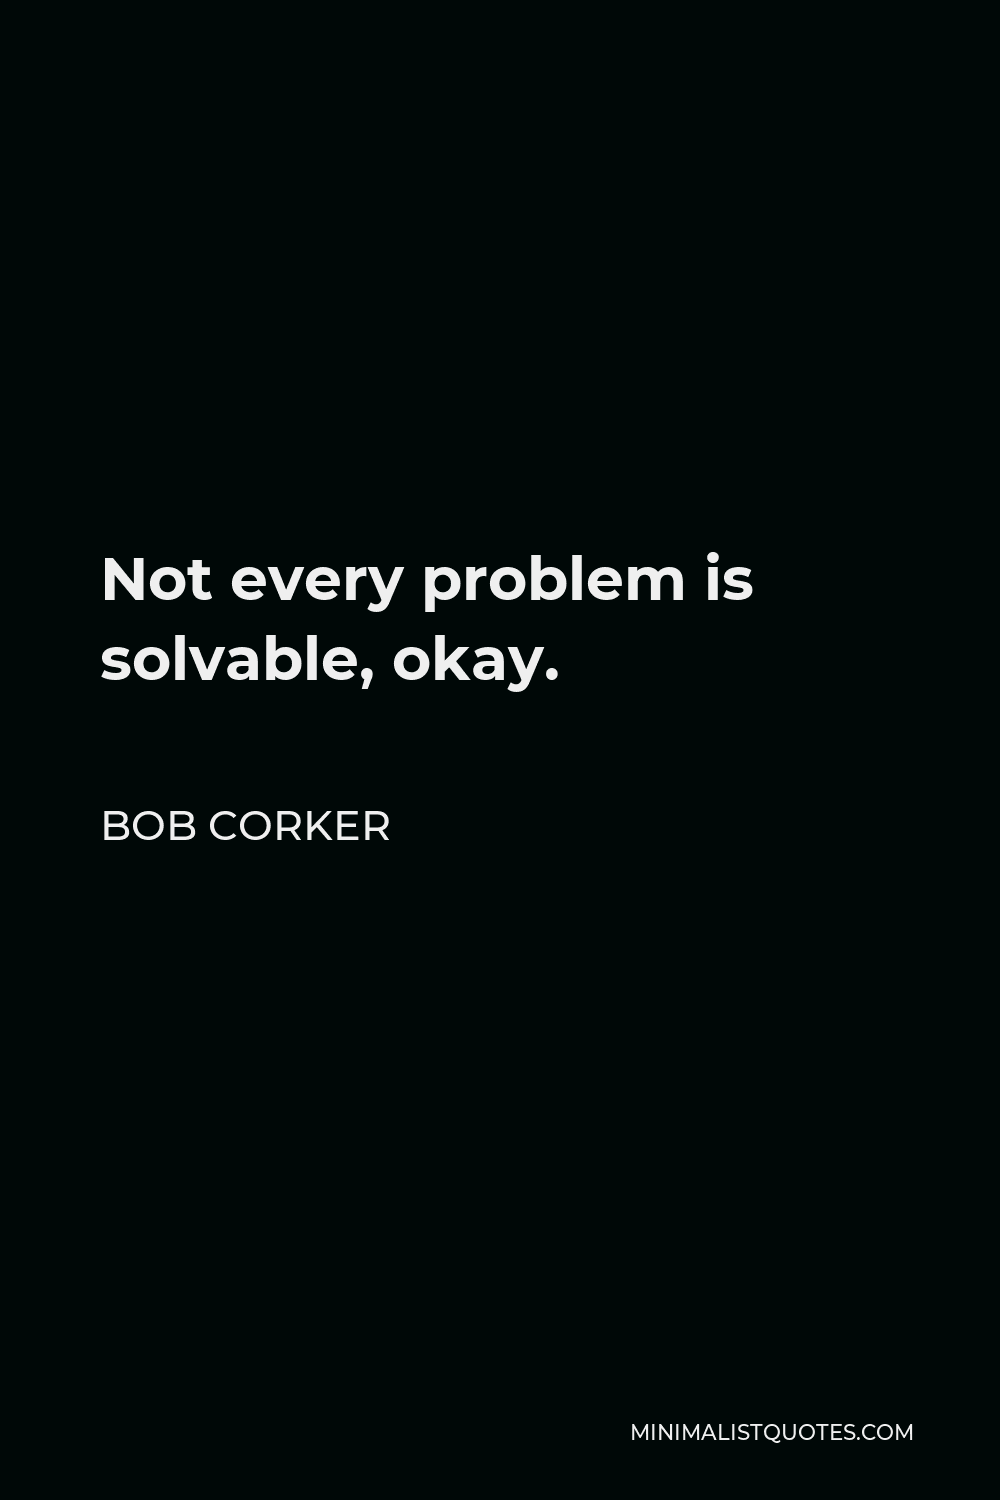 Bob Corker Quote - Not every problem is solvable, okay.